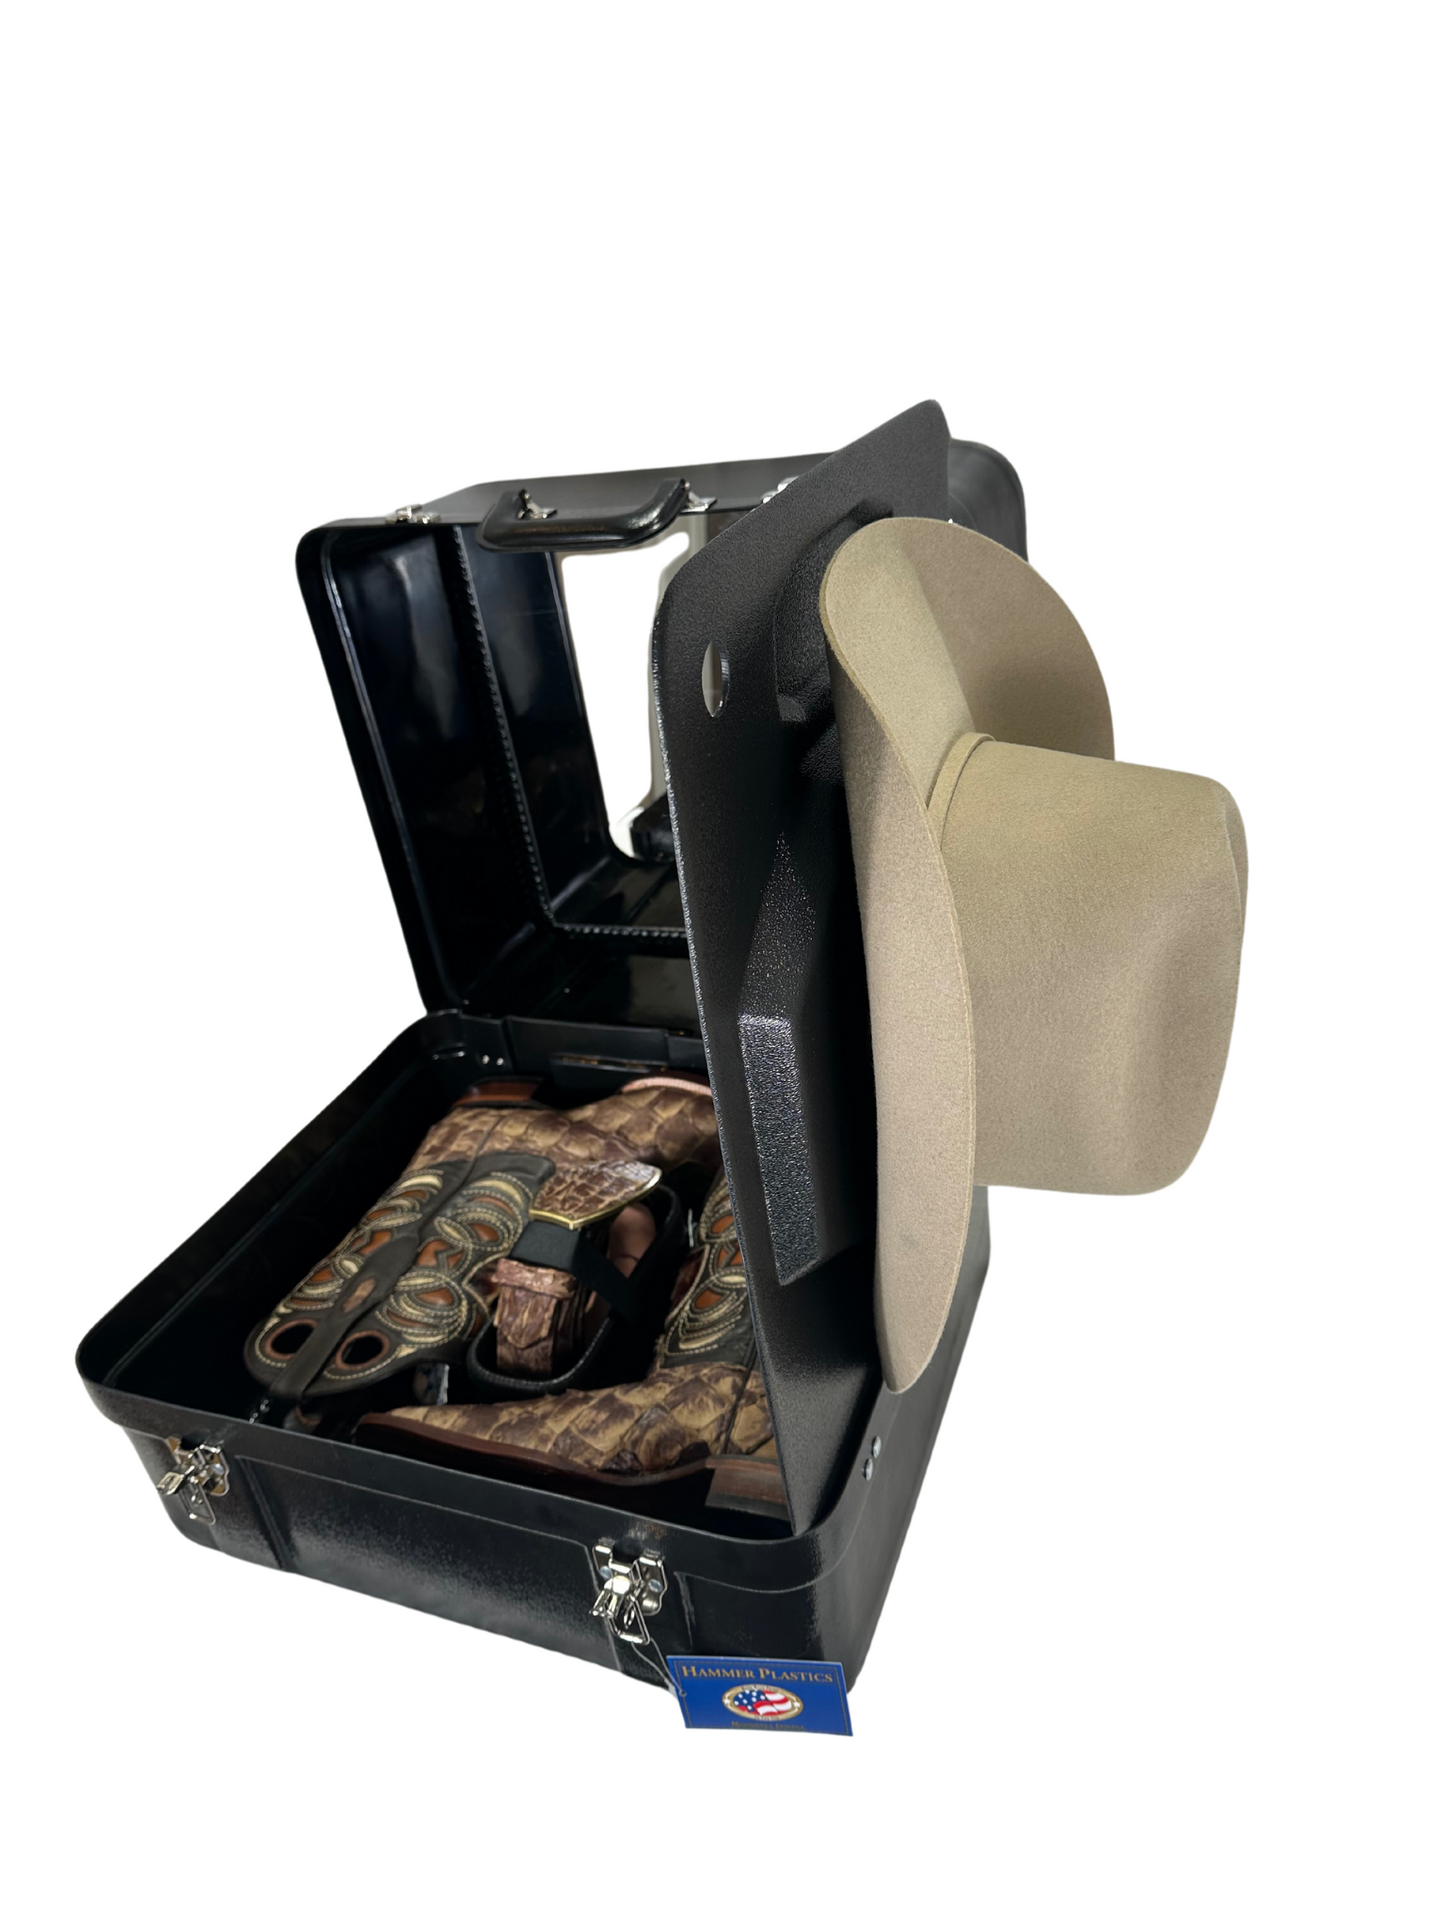 XL Classic Western 3-in-1 Presidential Travel Carrier